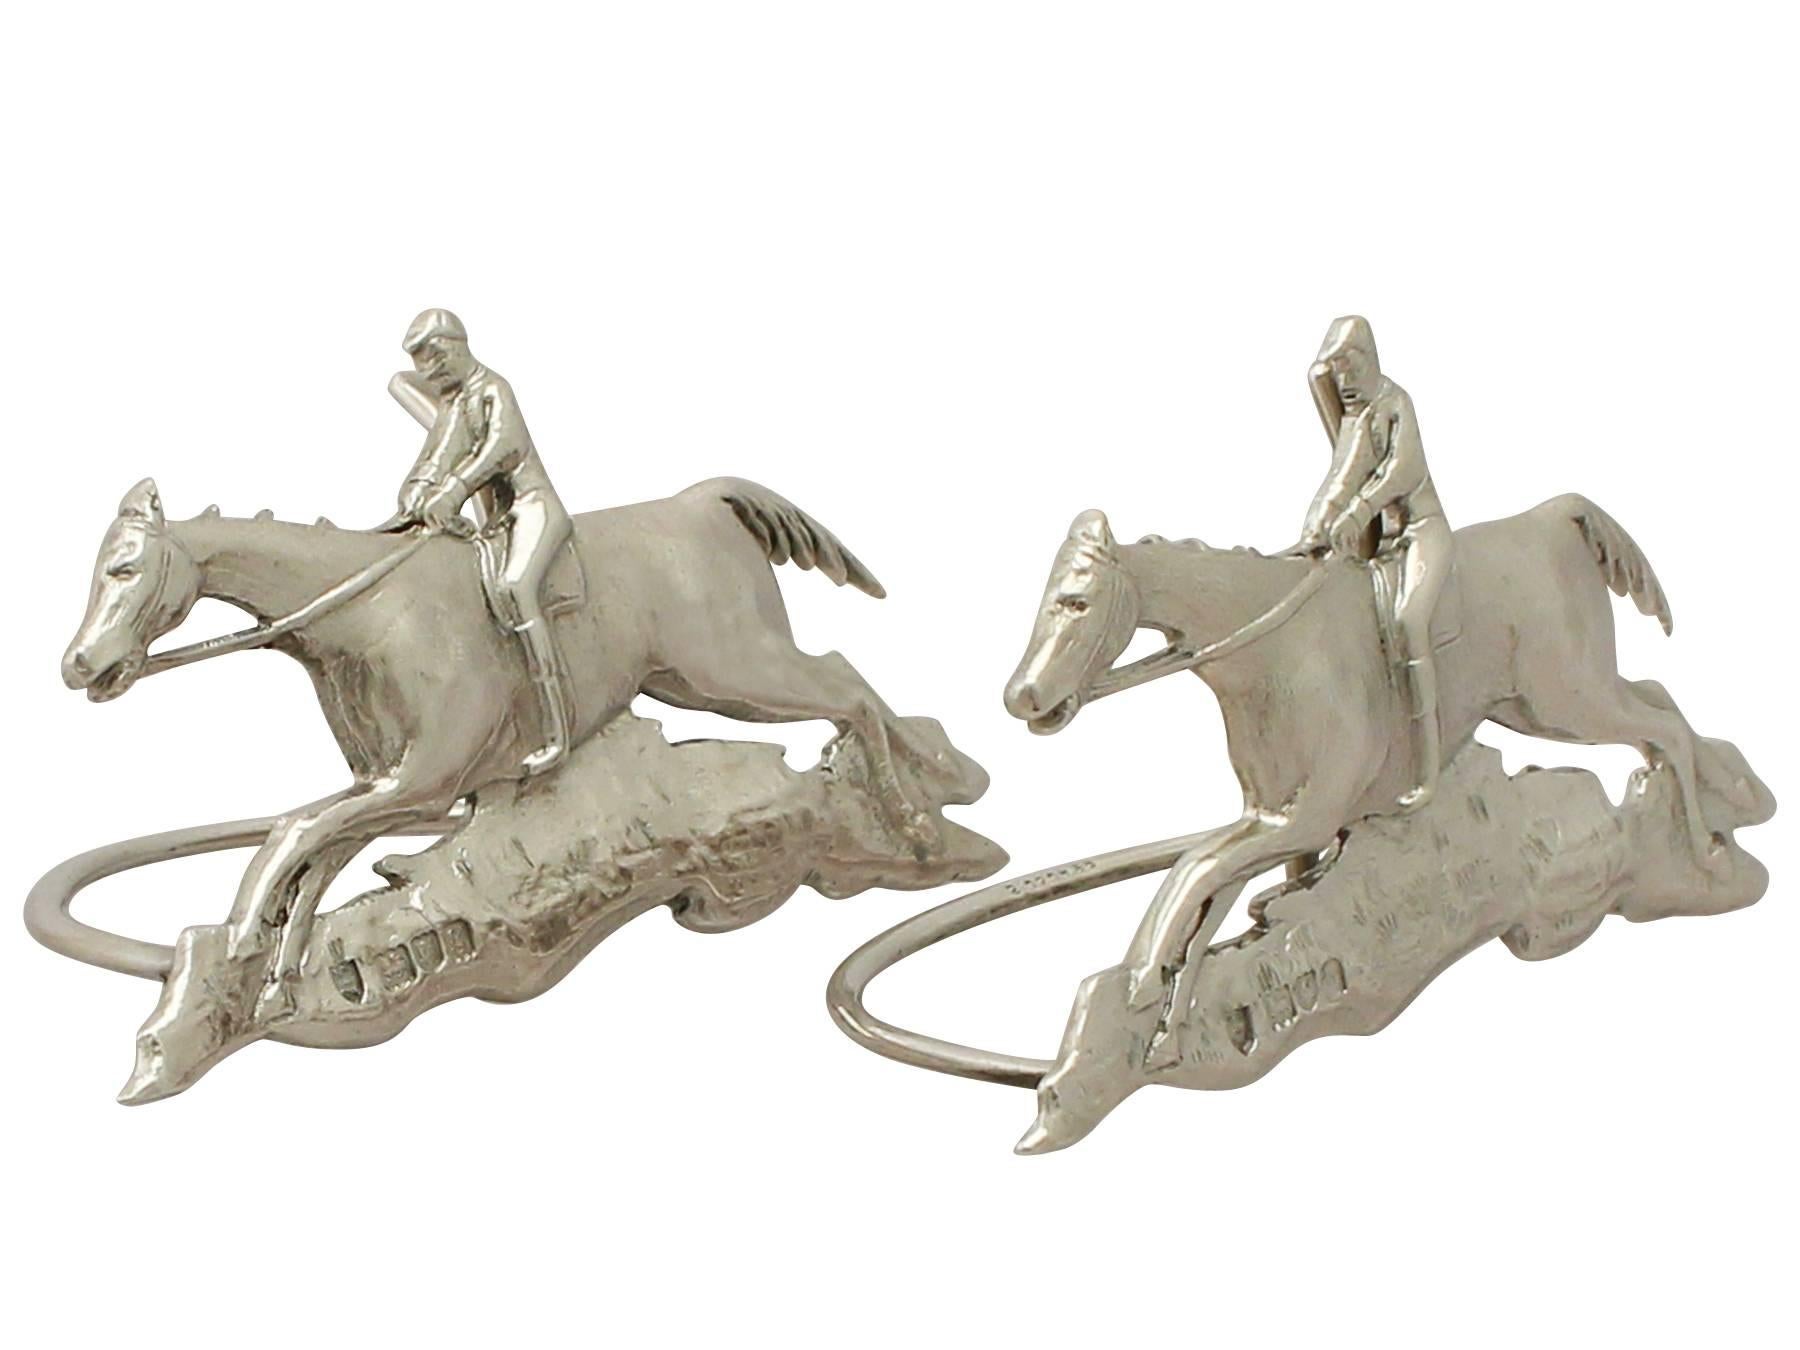 An exceptional, fine and impressive pair of antique Edwardian English cast sterling silver card/menu holders; an addition to our equestrian silverware collection.

These exceptional Edwardian cast sterling silver menu holders have been